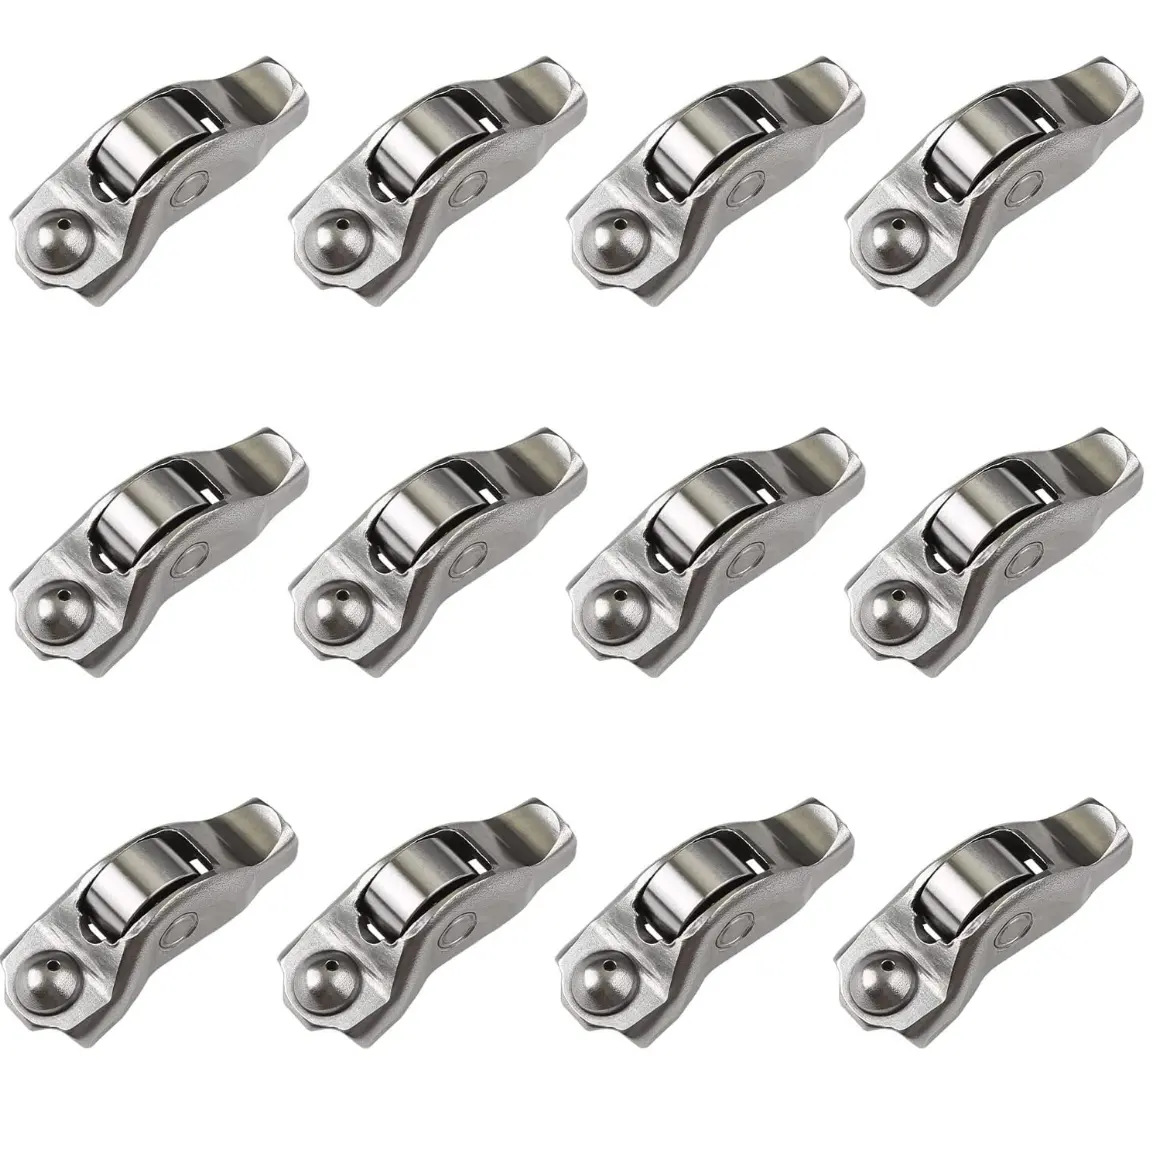 Replacement for Rocker Arm Kit Ford F150 F250 F350 F450 F550 Mustang GT Explorer Expedition Lincoln Navigator Mercury 3L3Z6564BA